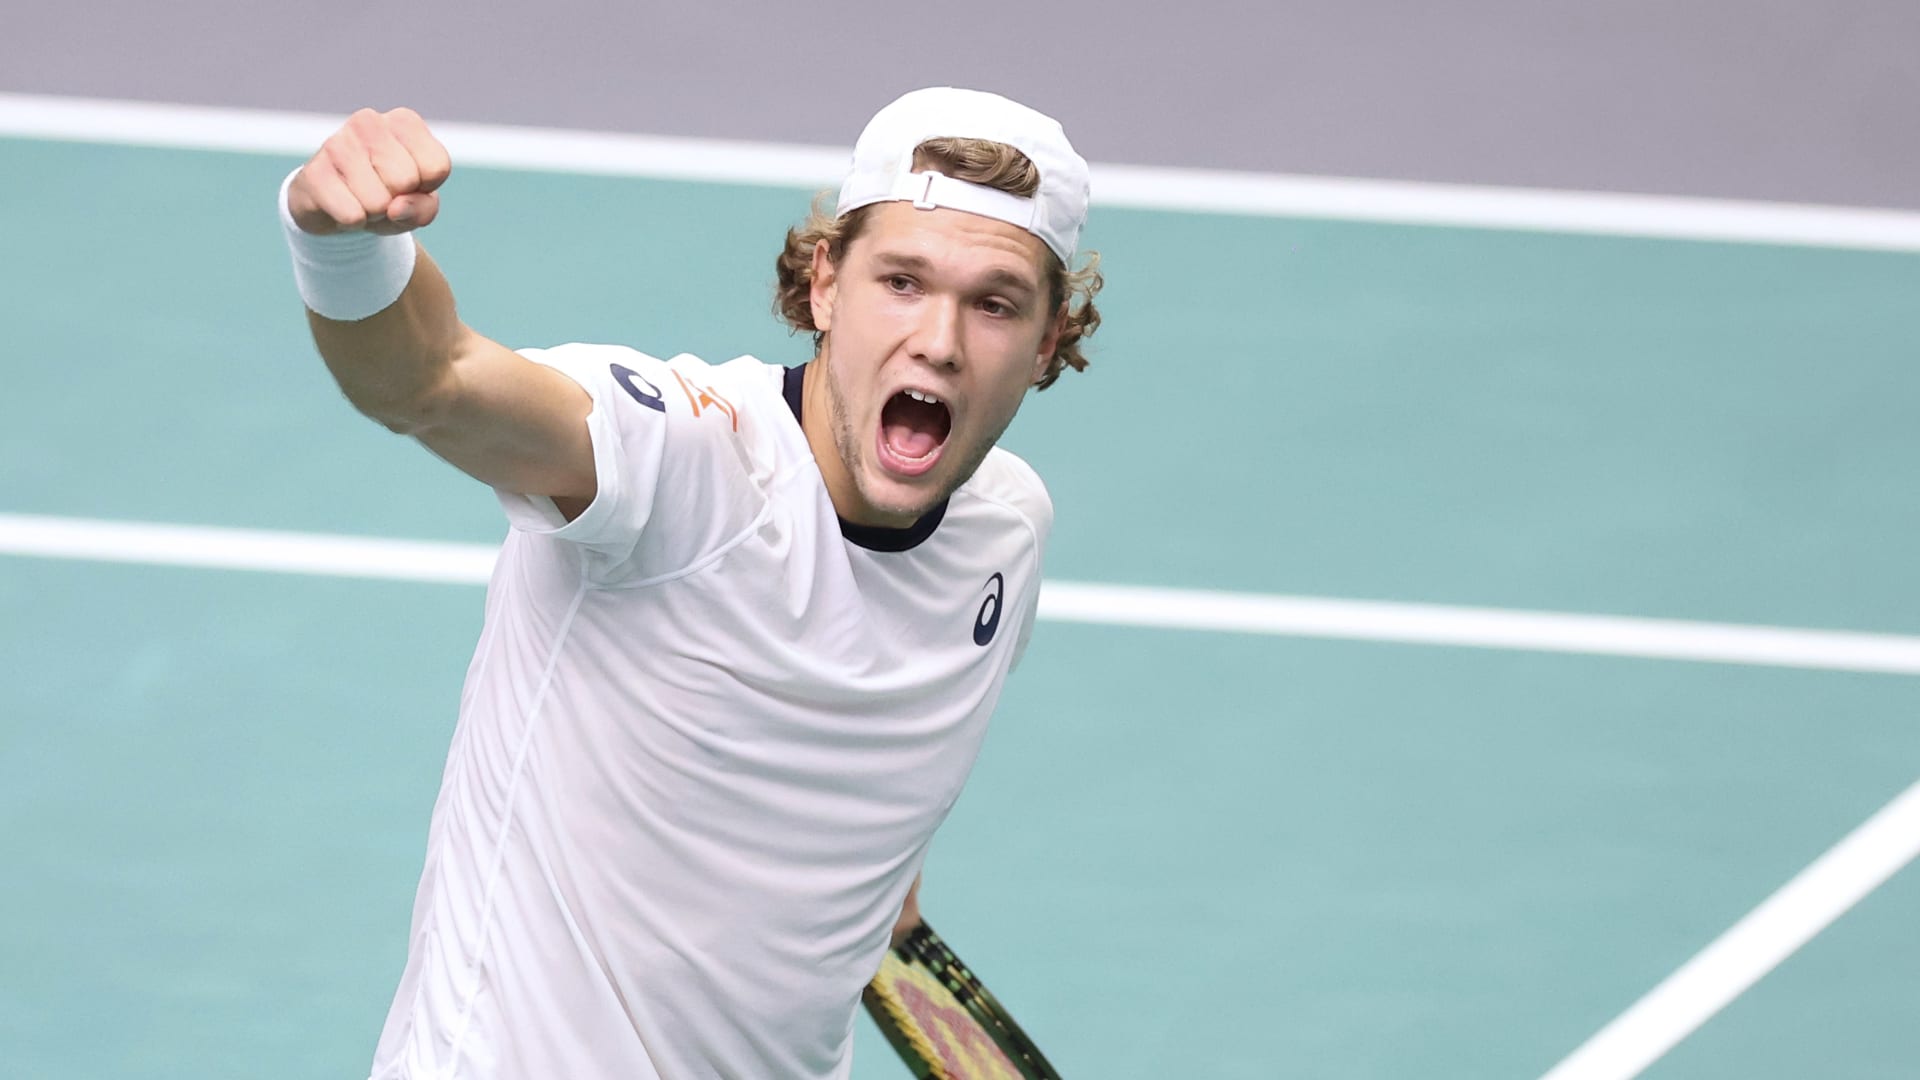 The Davis Cup, Refilled As Finland stuns U.S., national pride still rules